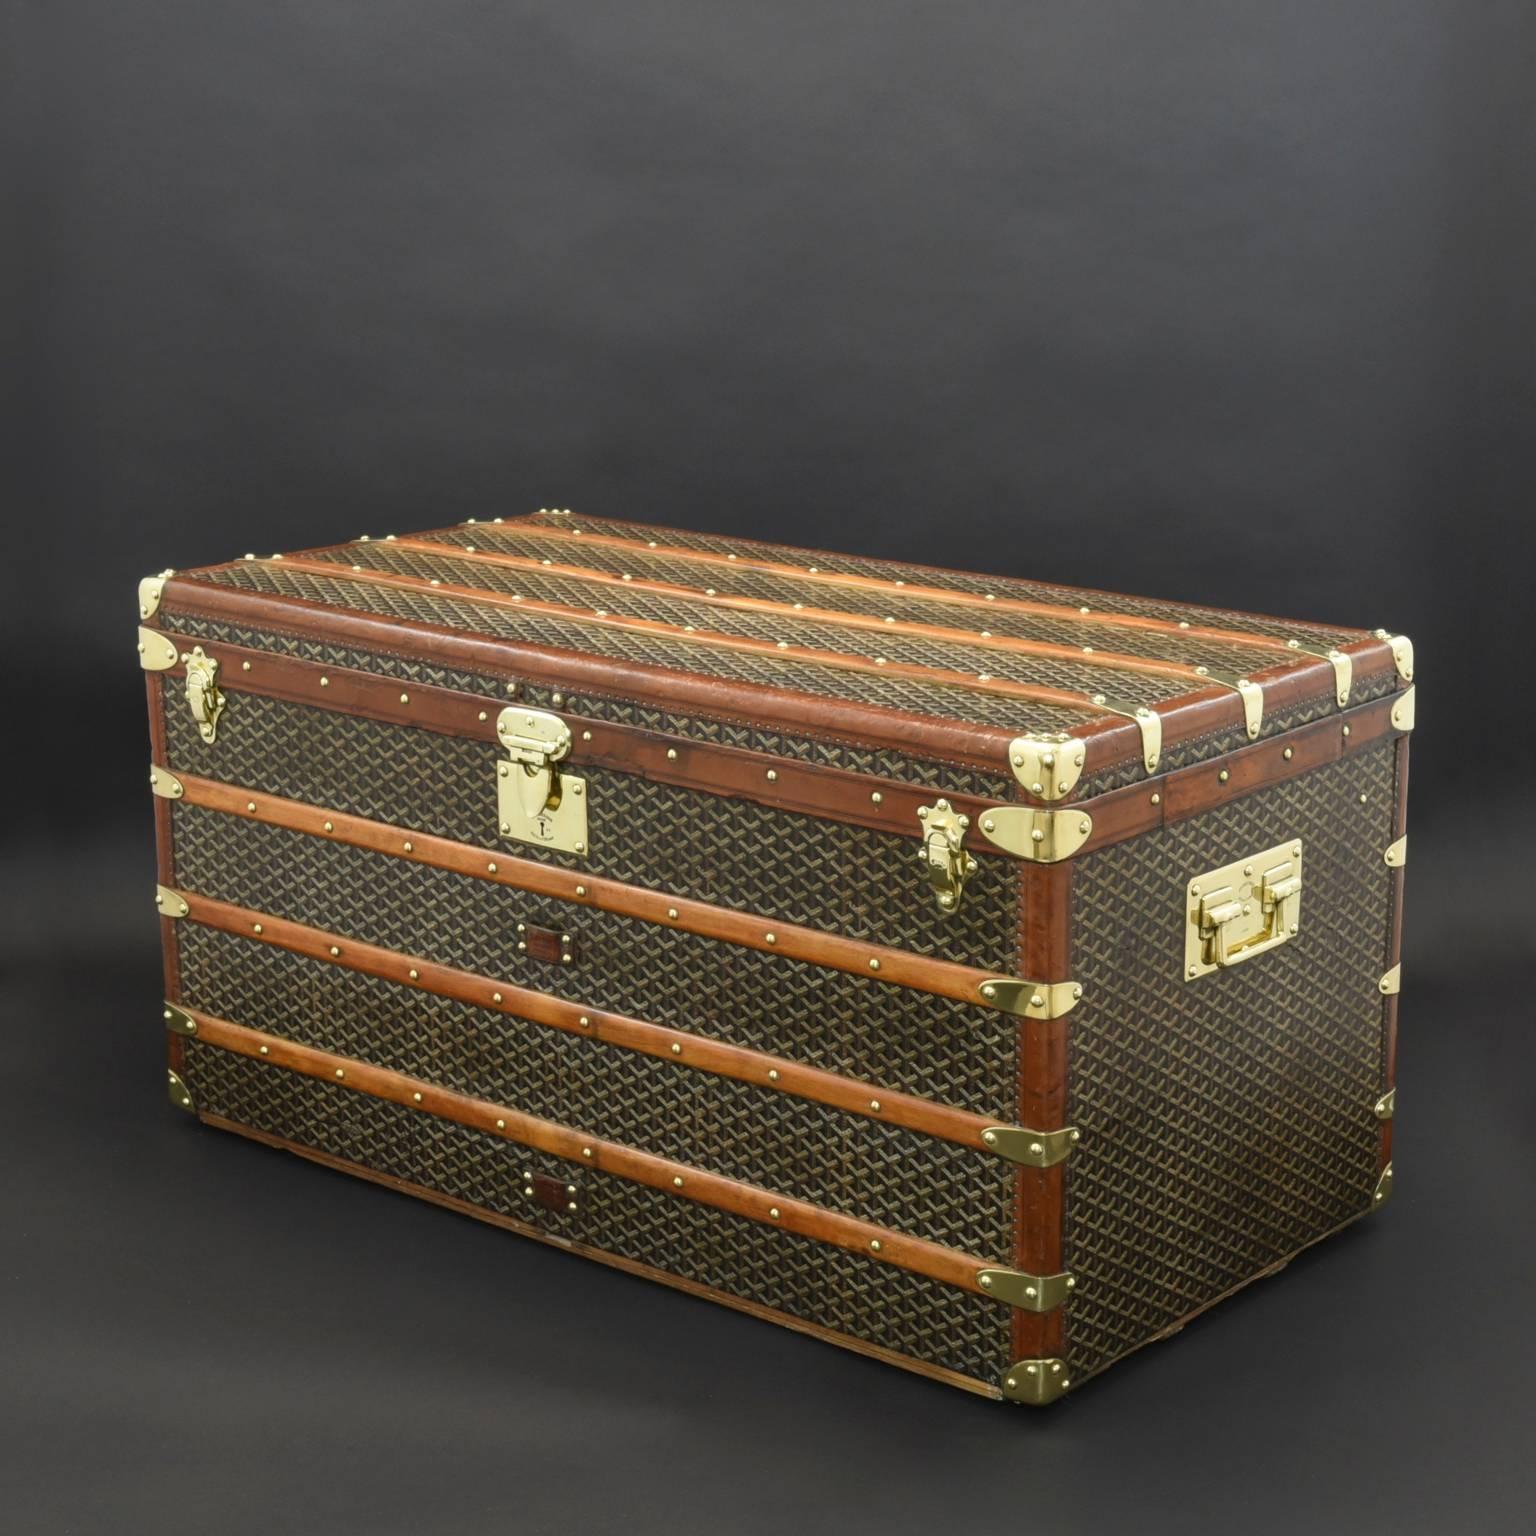 A splendid large size steamer trunk by Goyard with chevron pattern canvas covering, leather trim, and polished brass handles, lock & catches; circa 1909. The interior has been re-lined and some of the leather trim to the exterior repaired